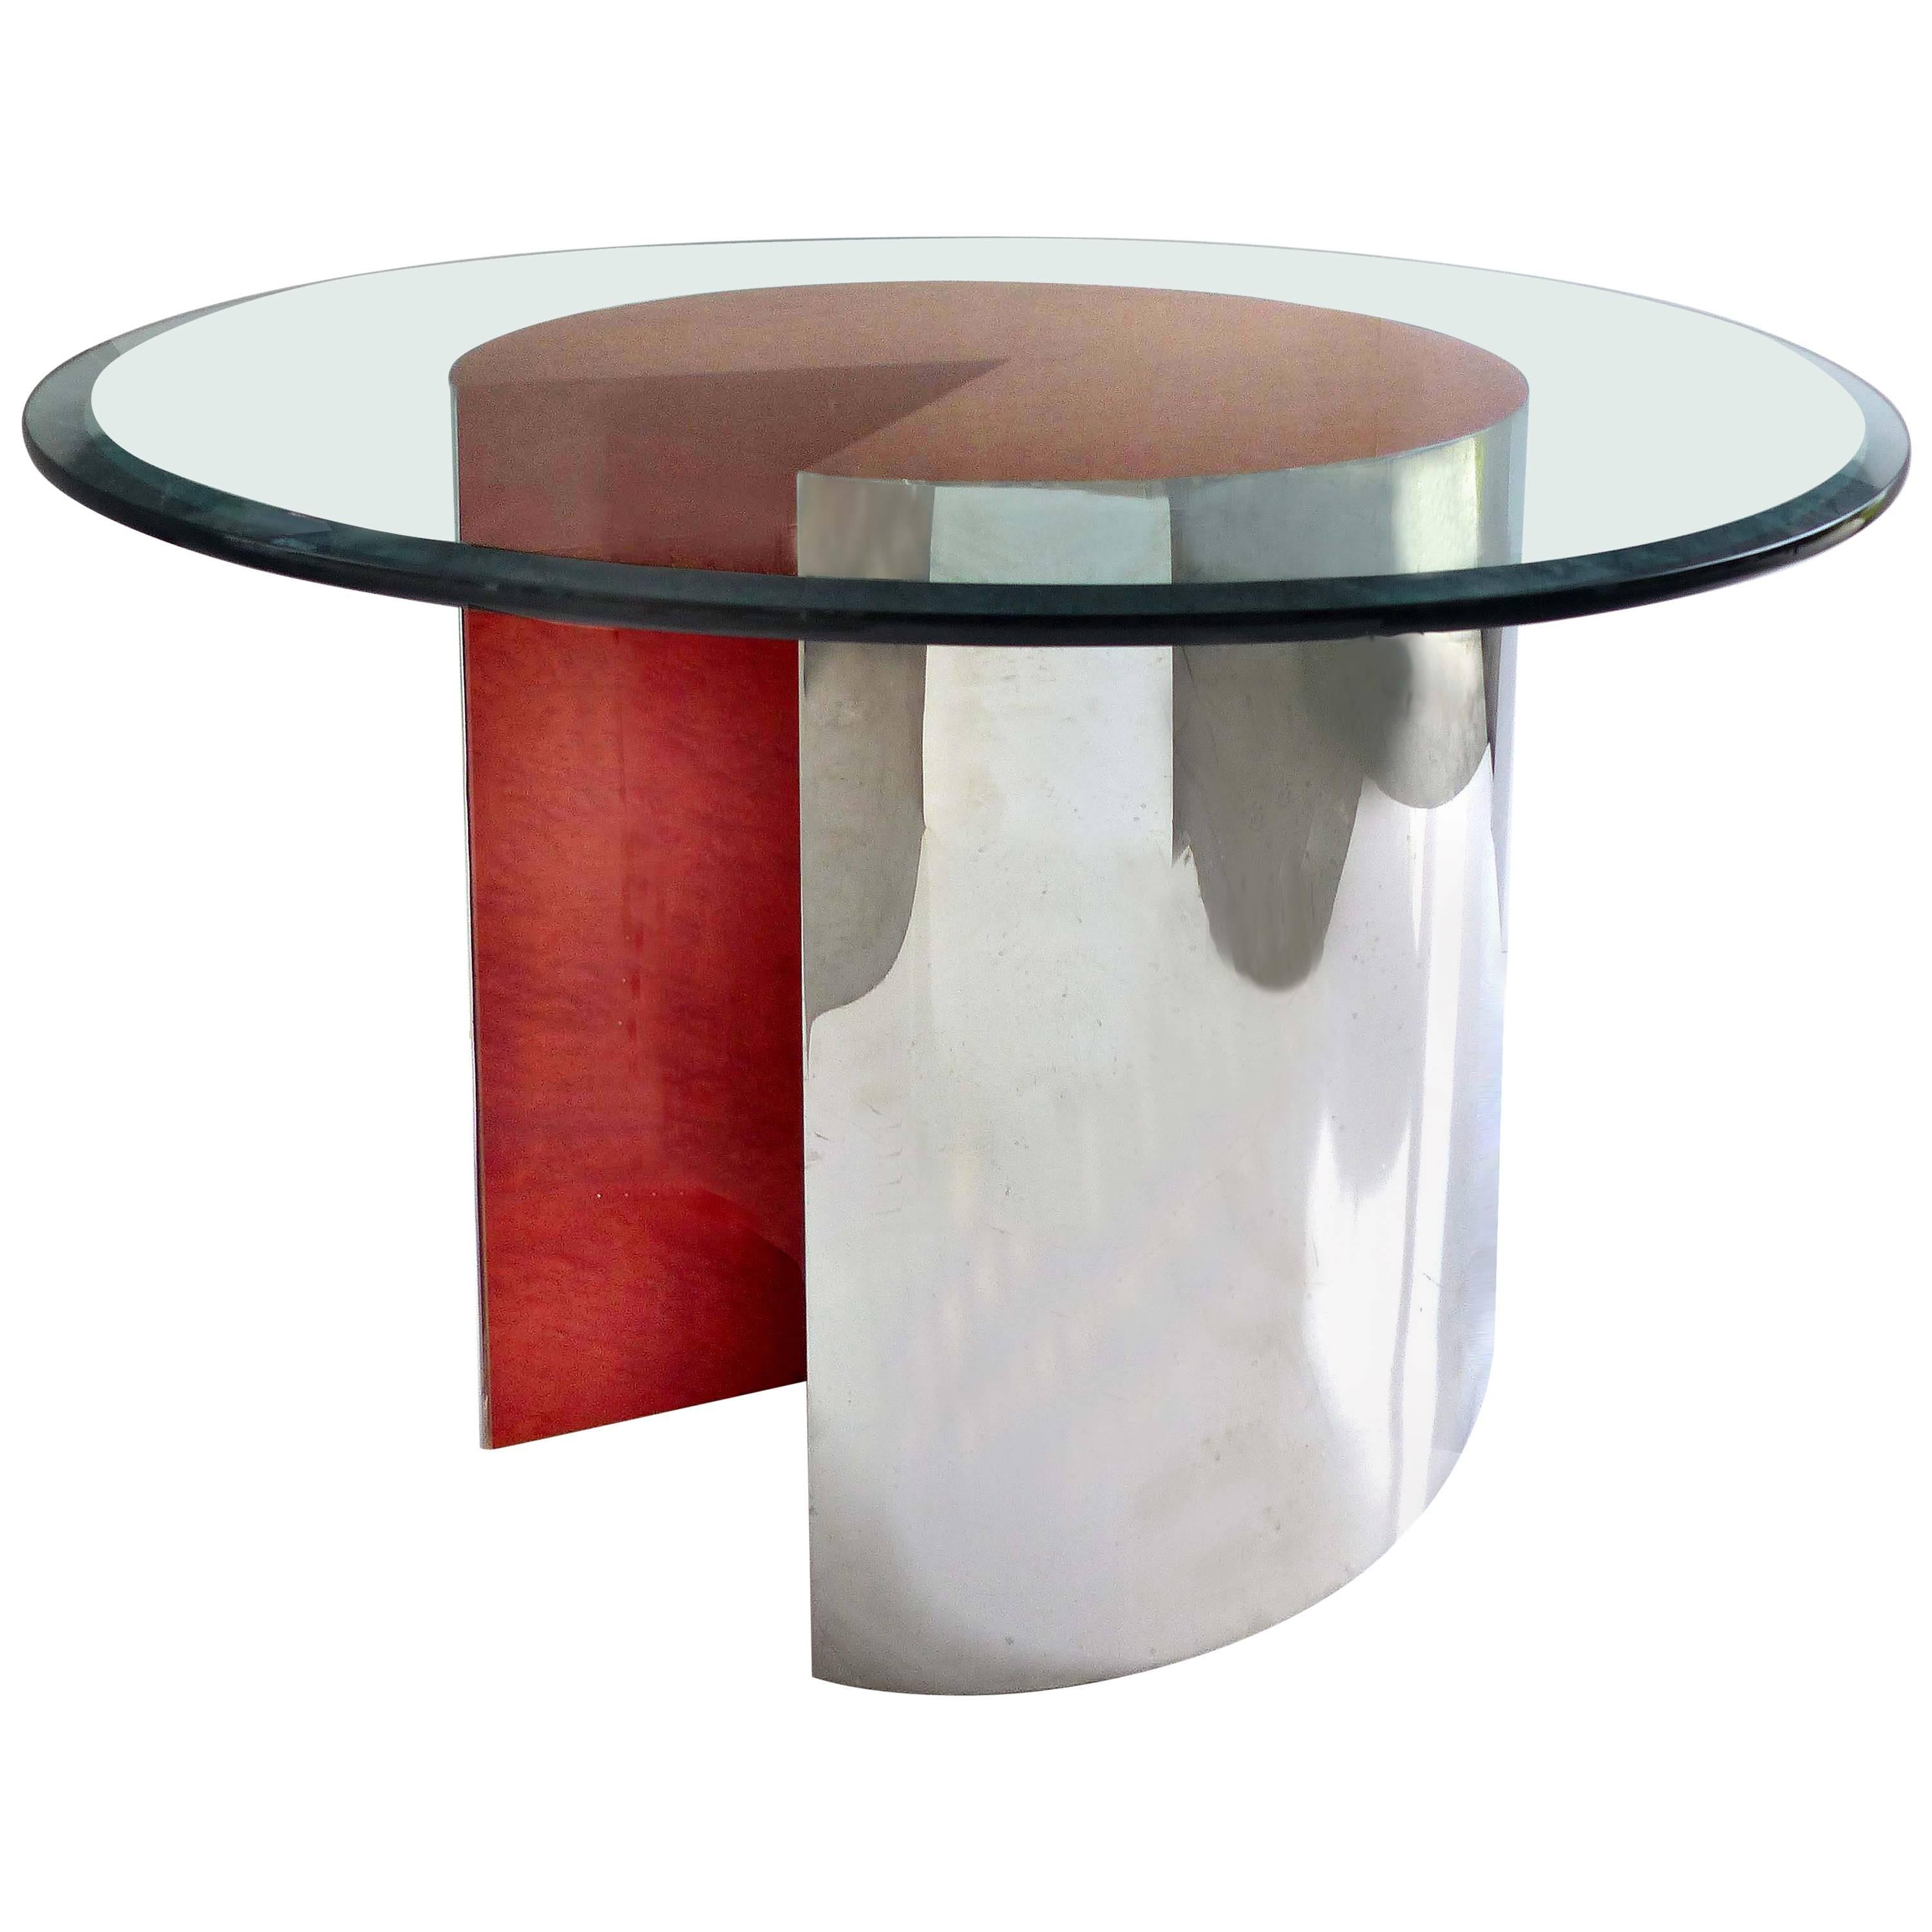 1980s Leon Rosen for Pace "Pie Table" in Chrome and Lacquered Wood